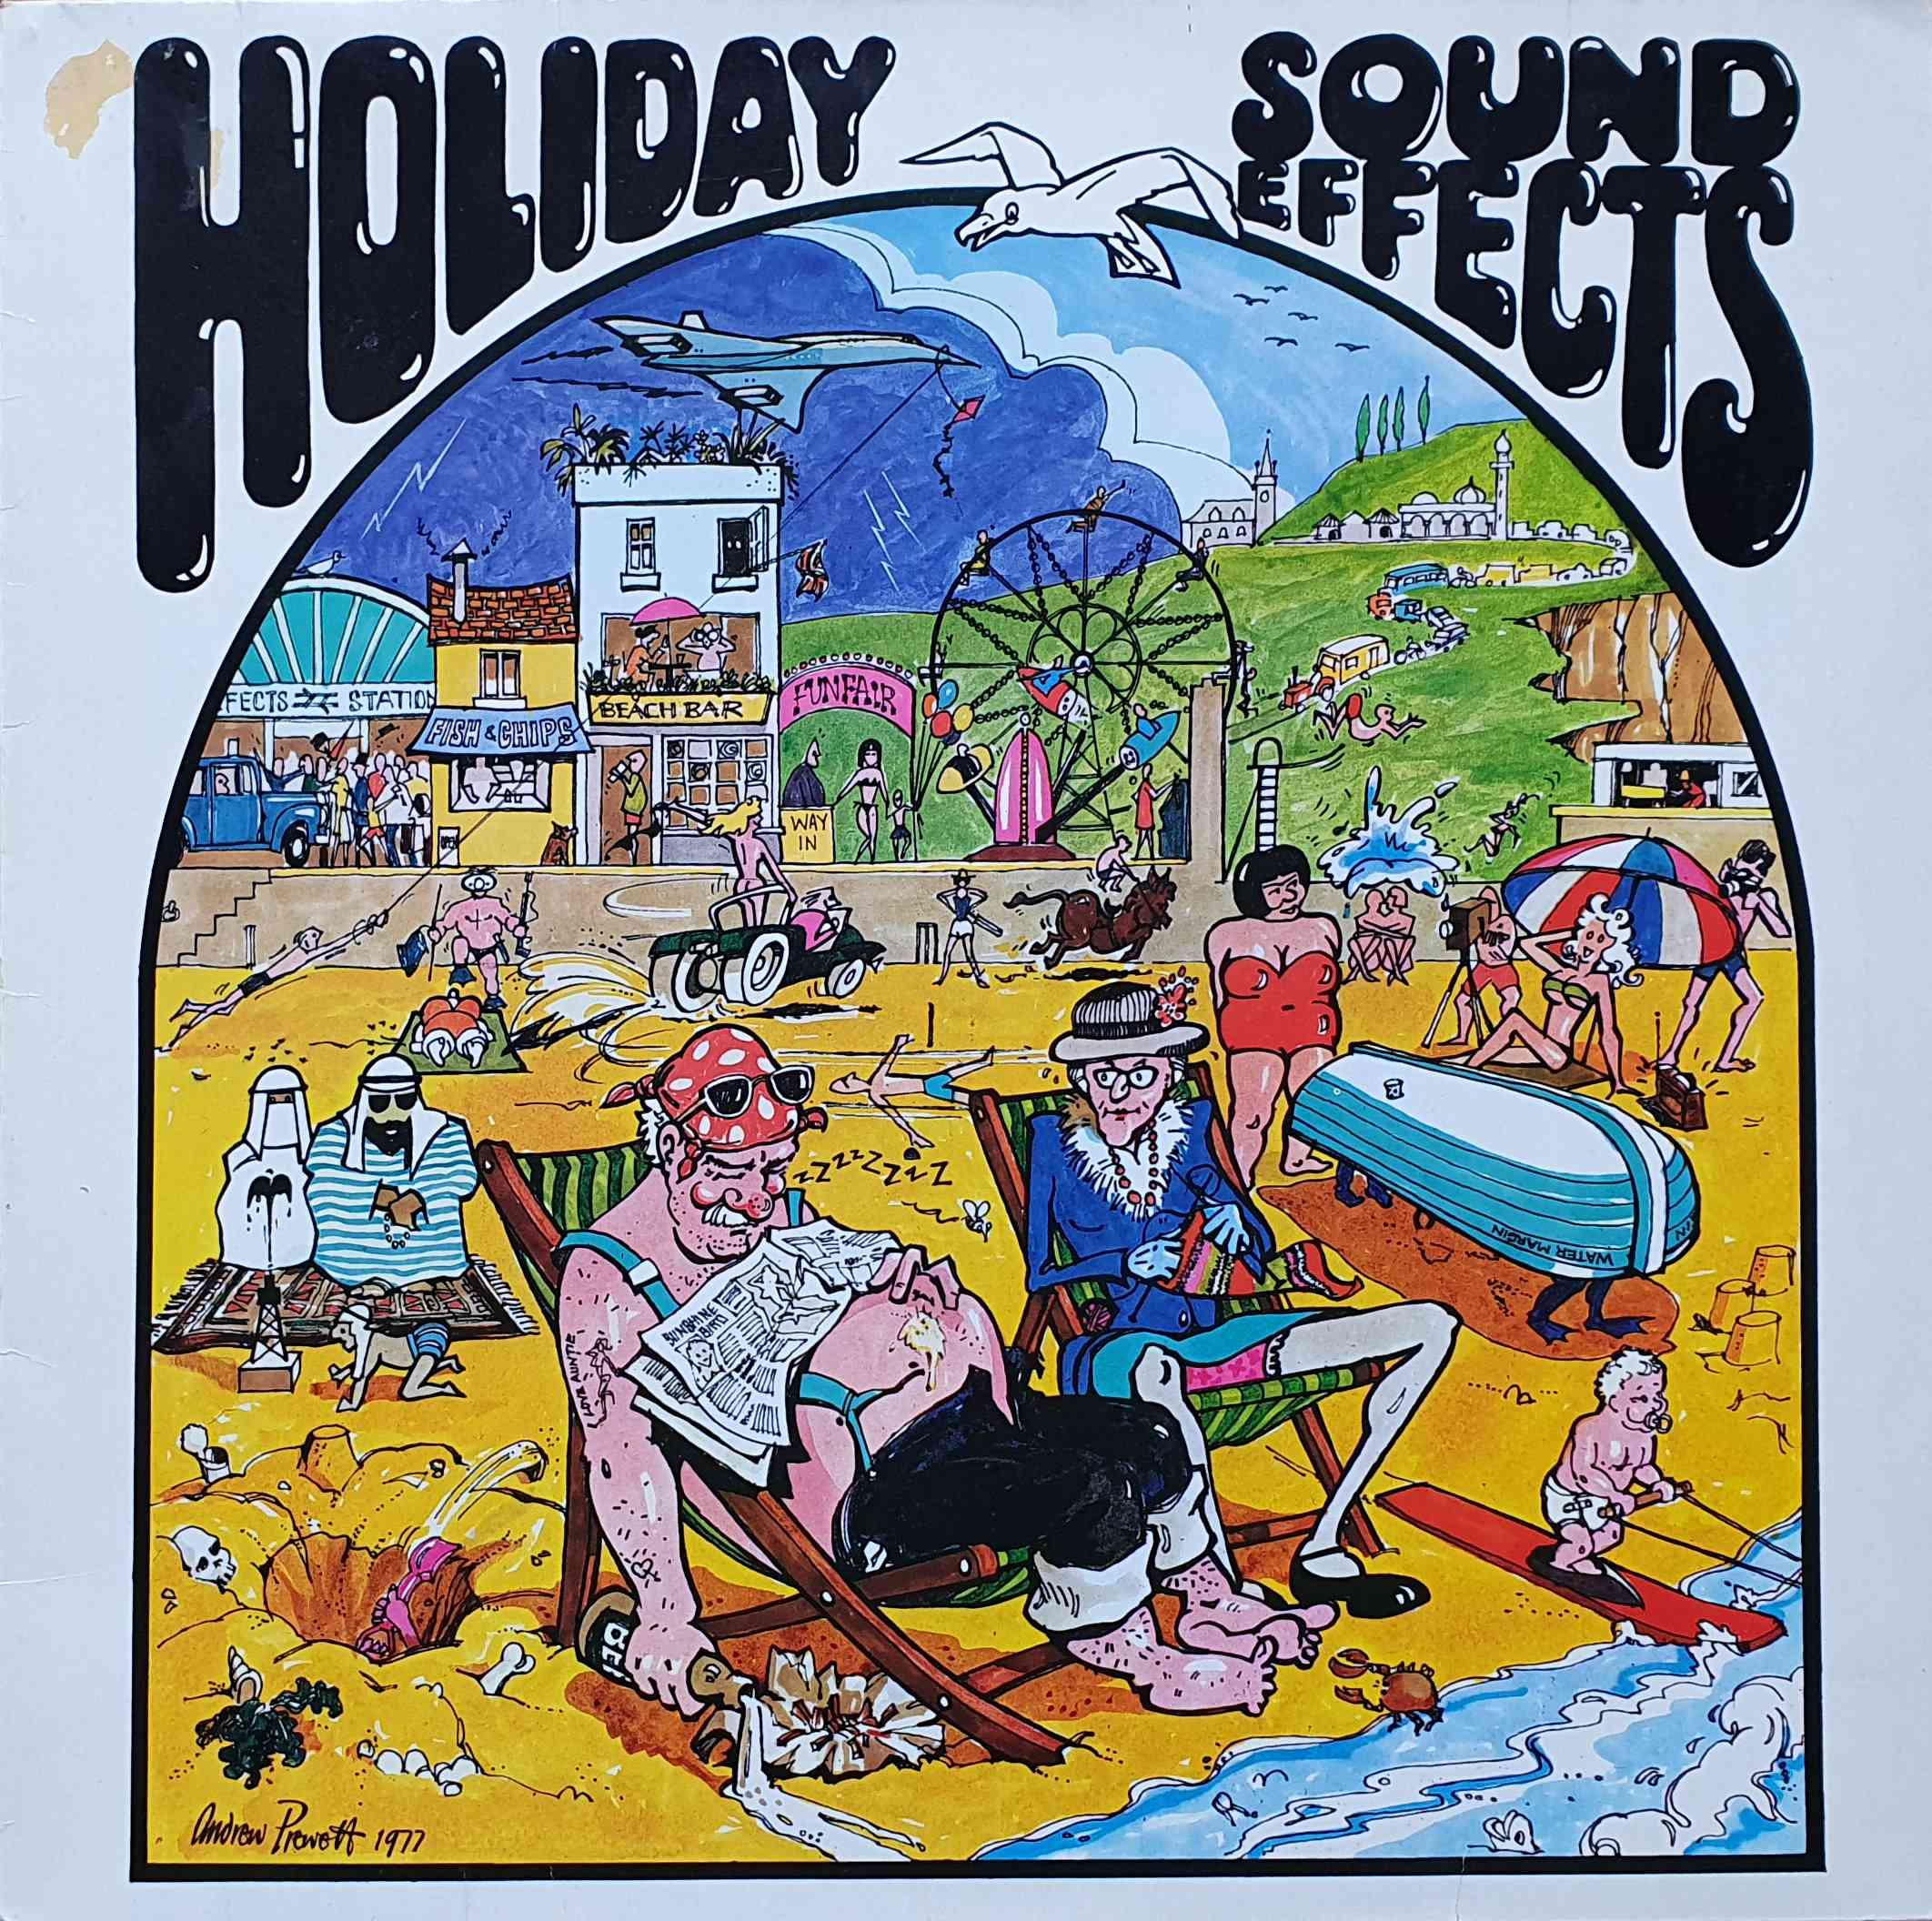 Picture of Sound effects - Holiday sounds by artist Various from the BBC albums - Records and Tapes library